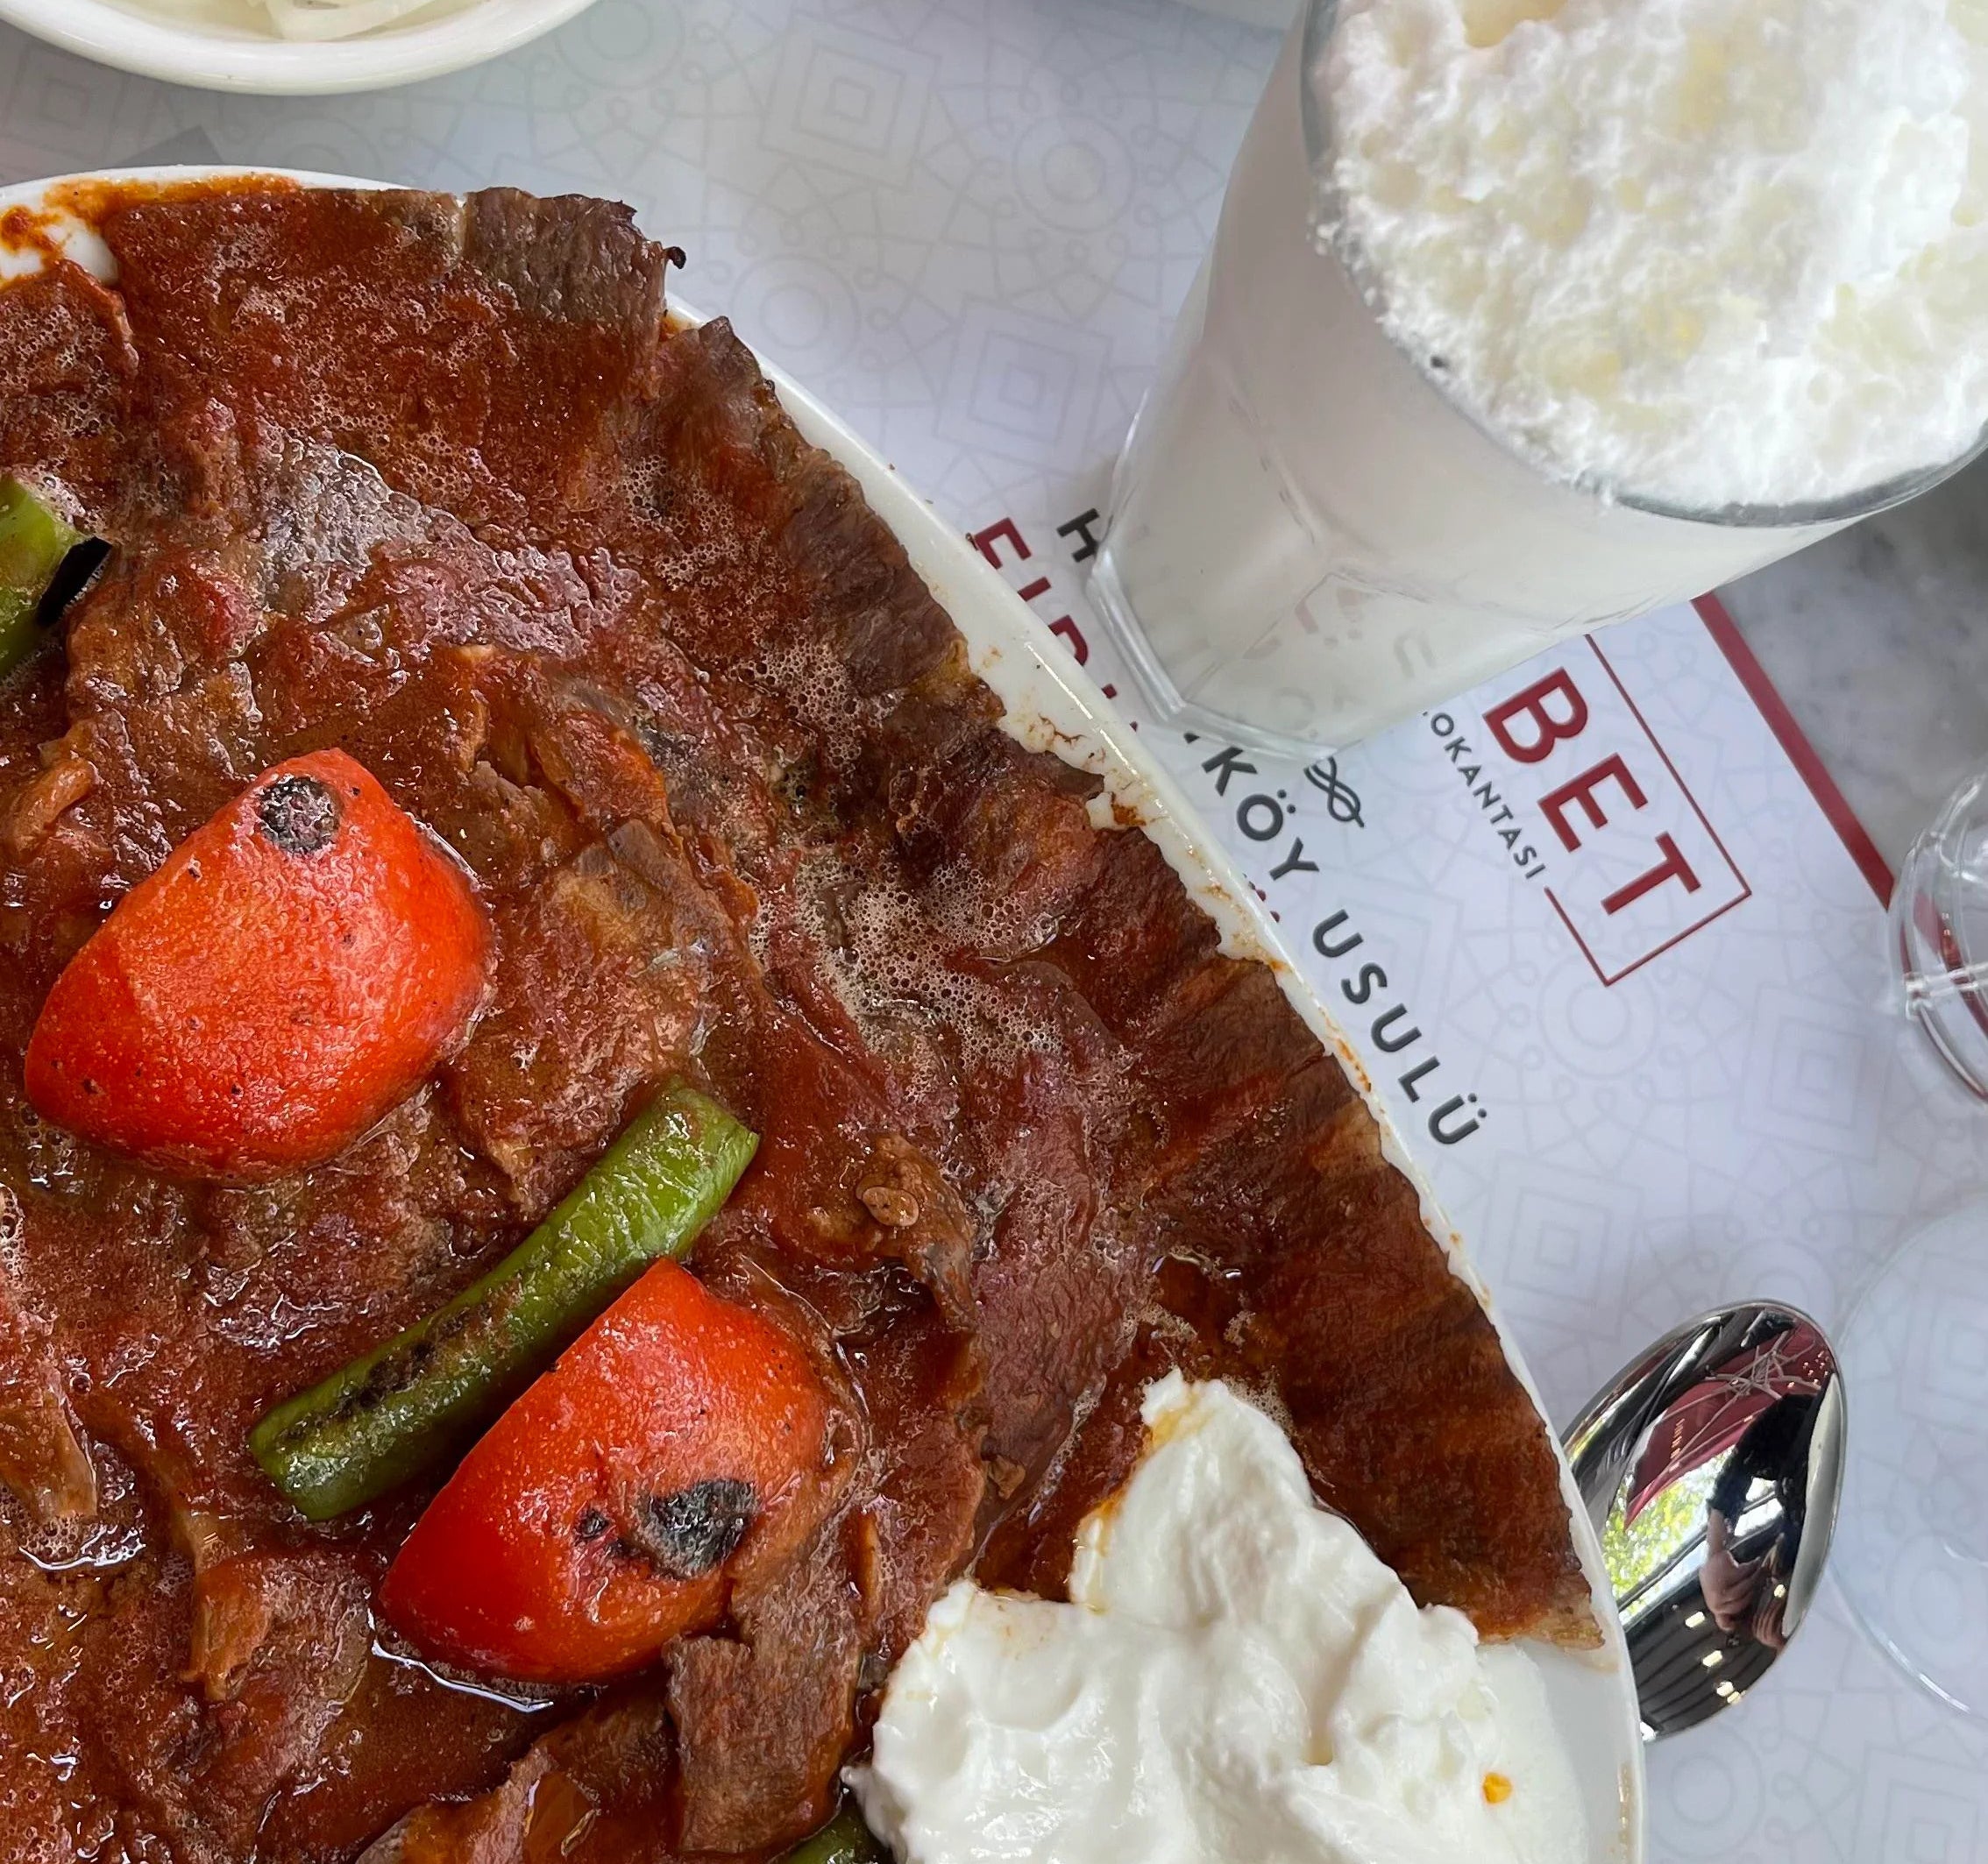 A cup of ayran is on the table next to a plate of doner iskender and pickled veggies